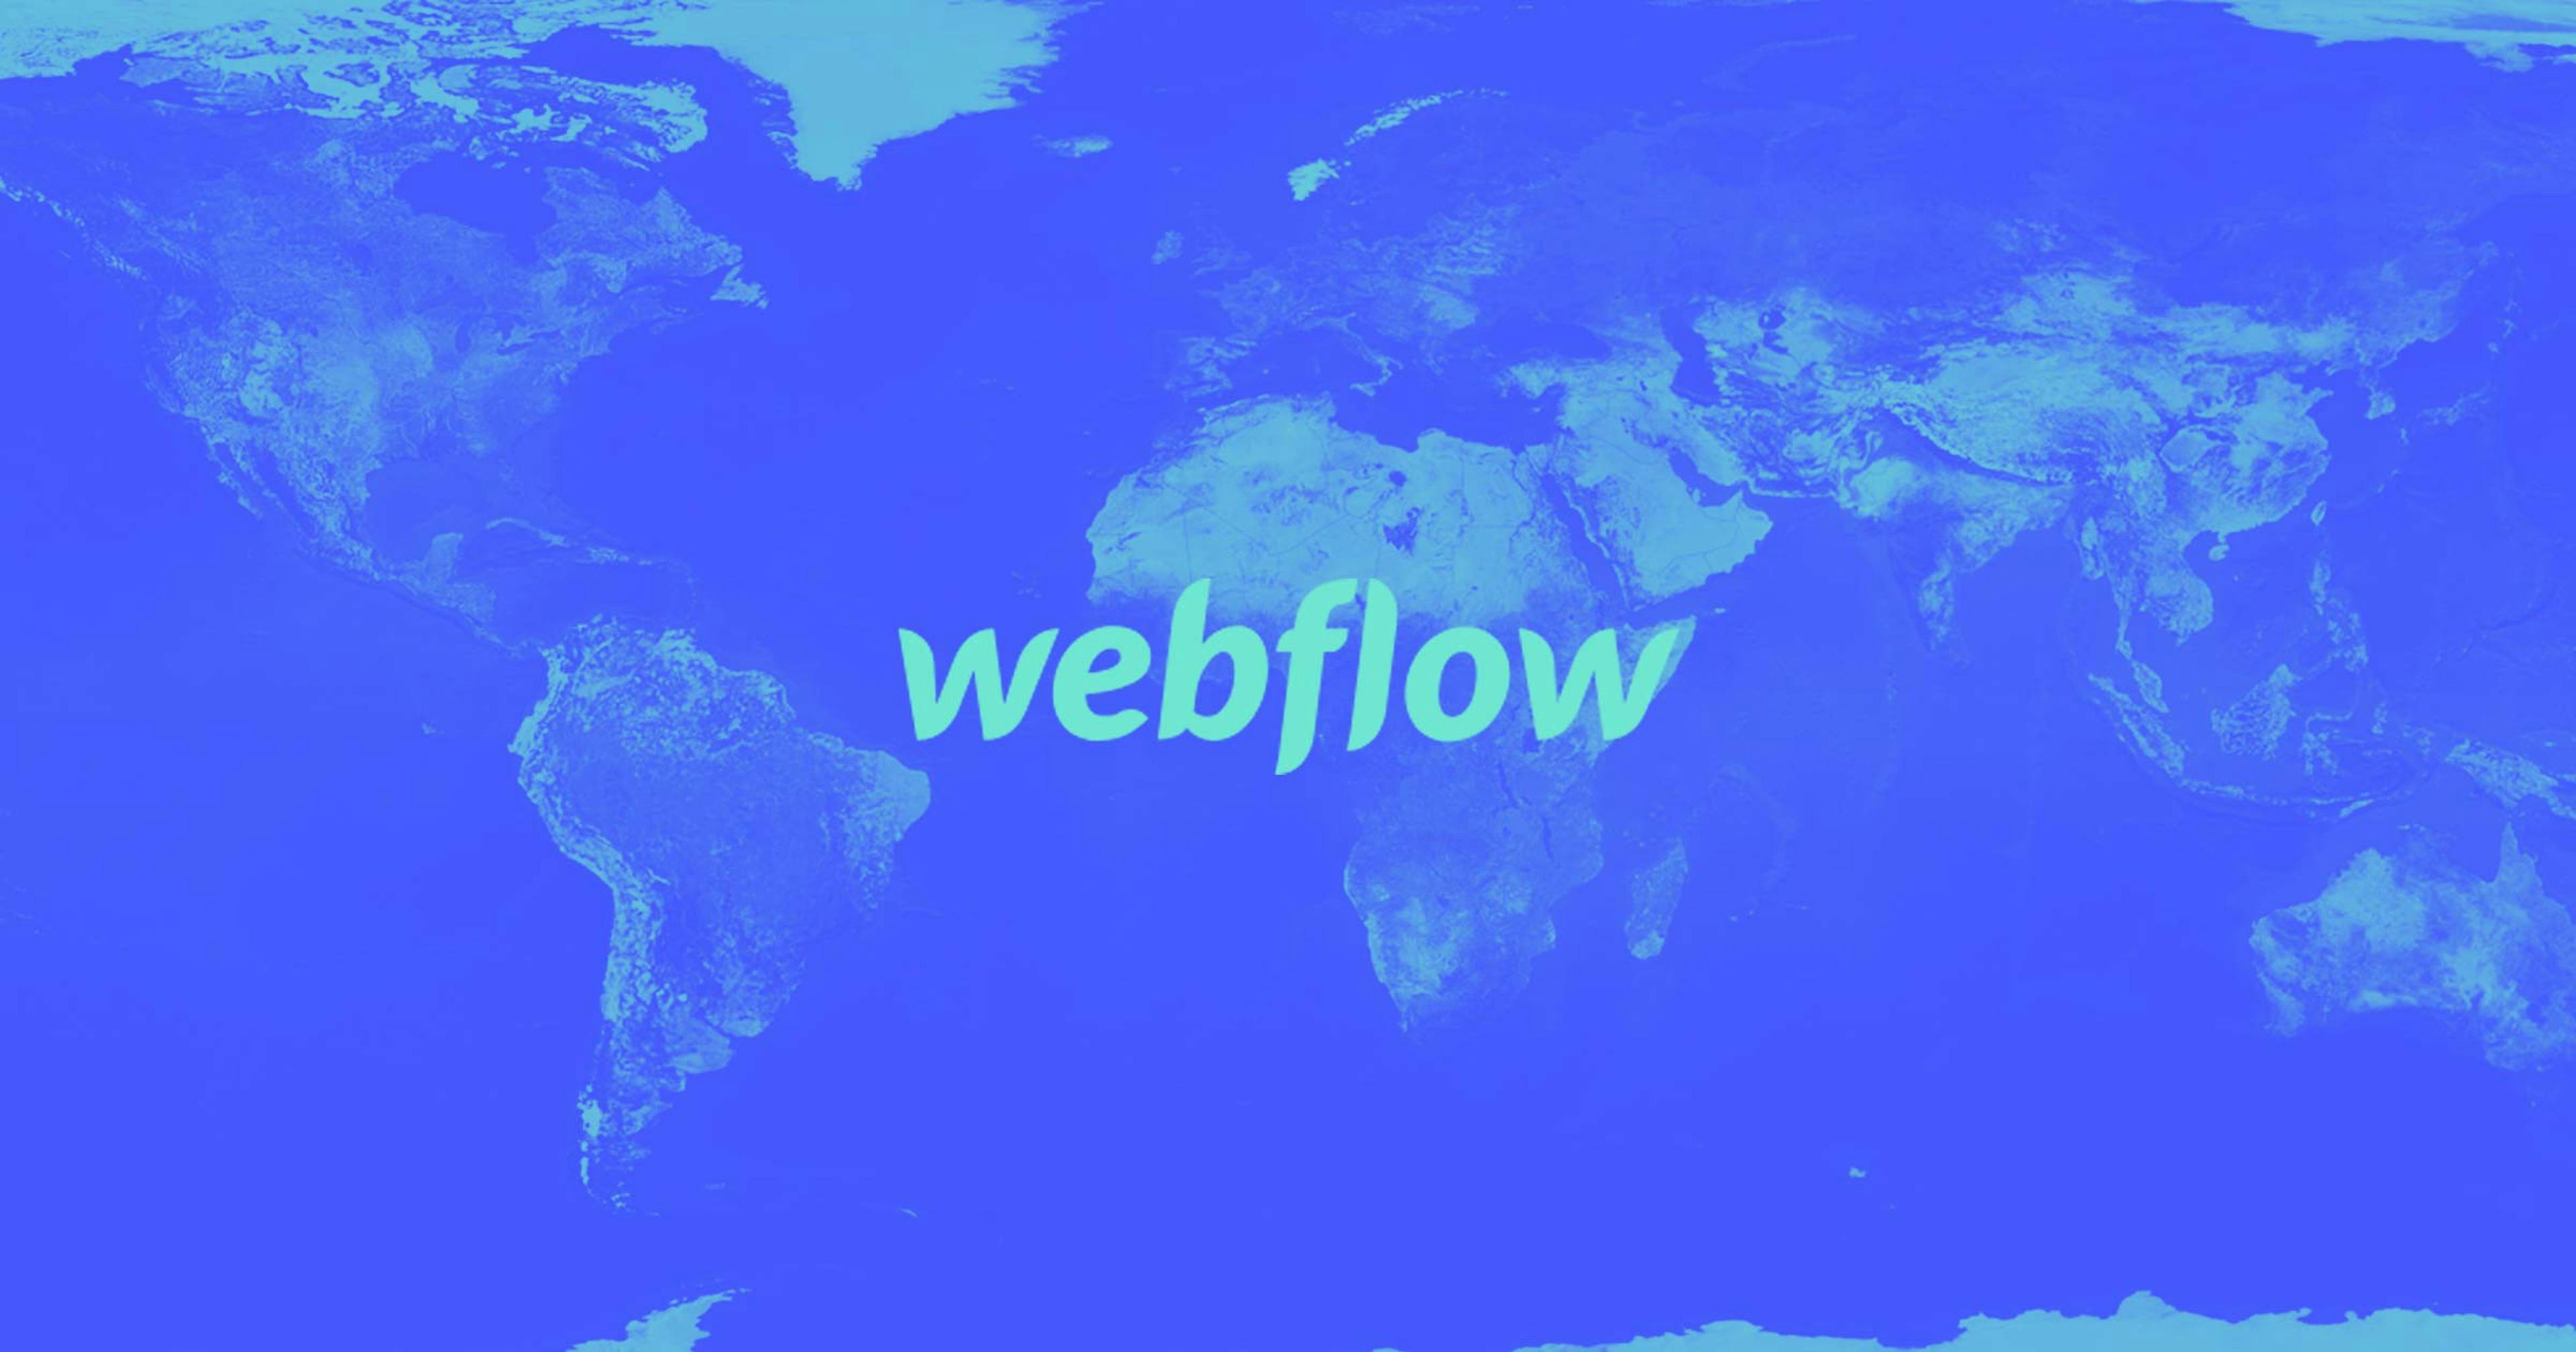 /building-a-remote-friendly-company-an-interview-with-webflow-ceo-vlad-magdalin-3597d55df44c feature image